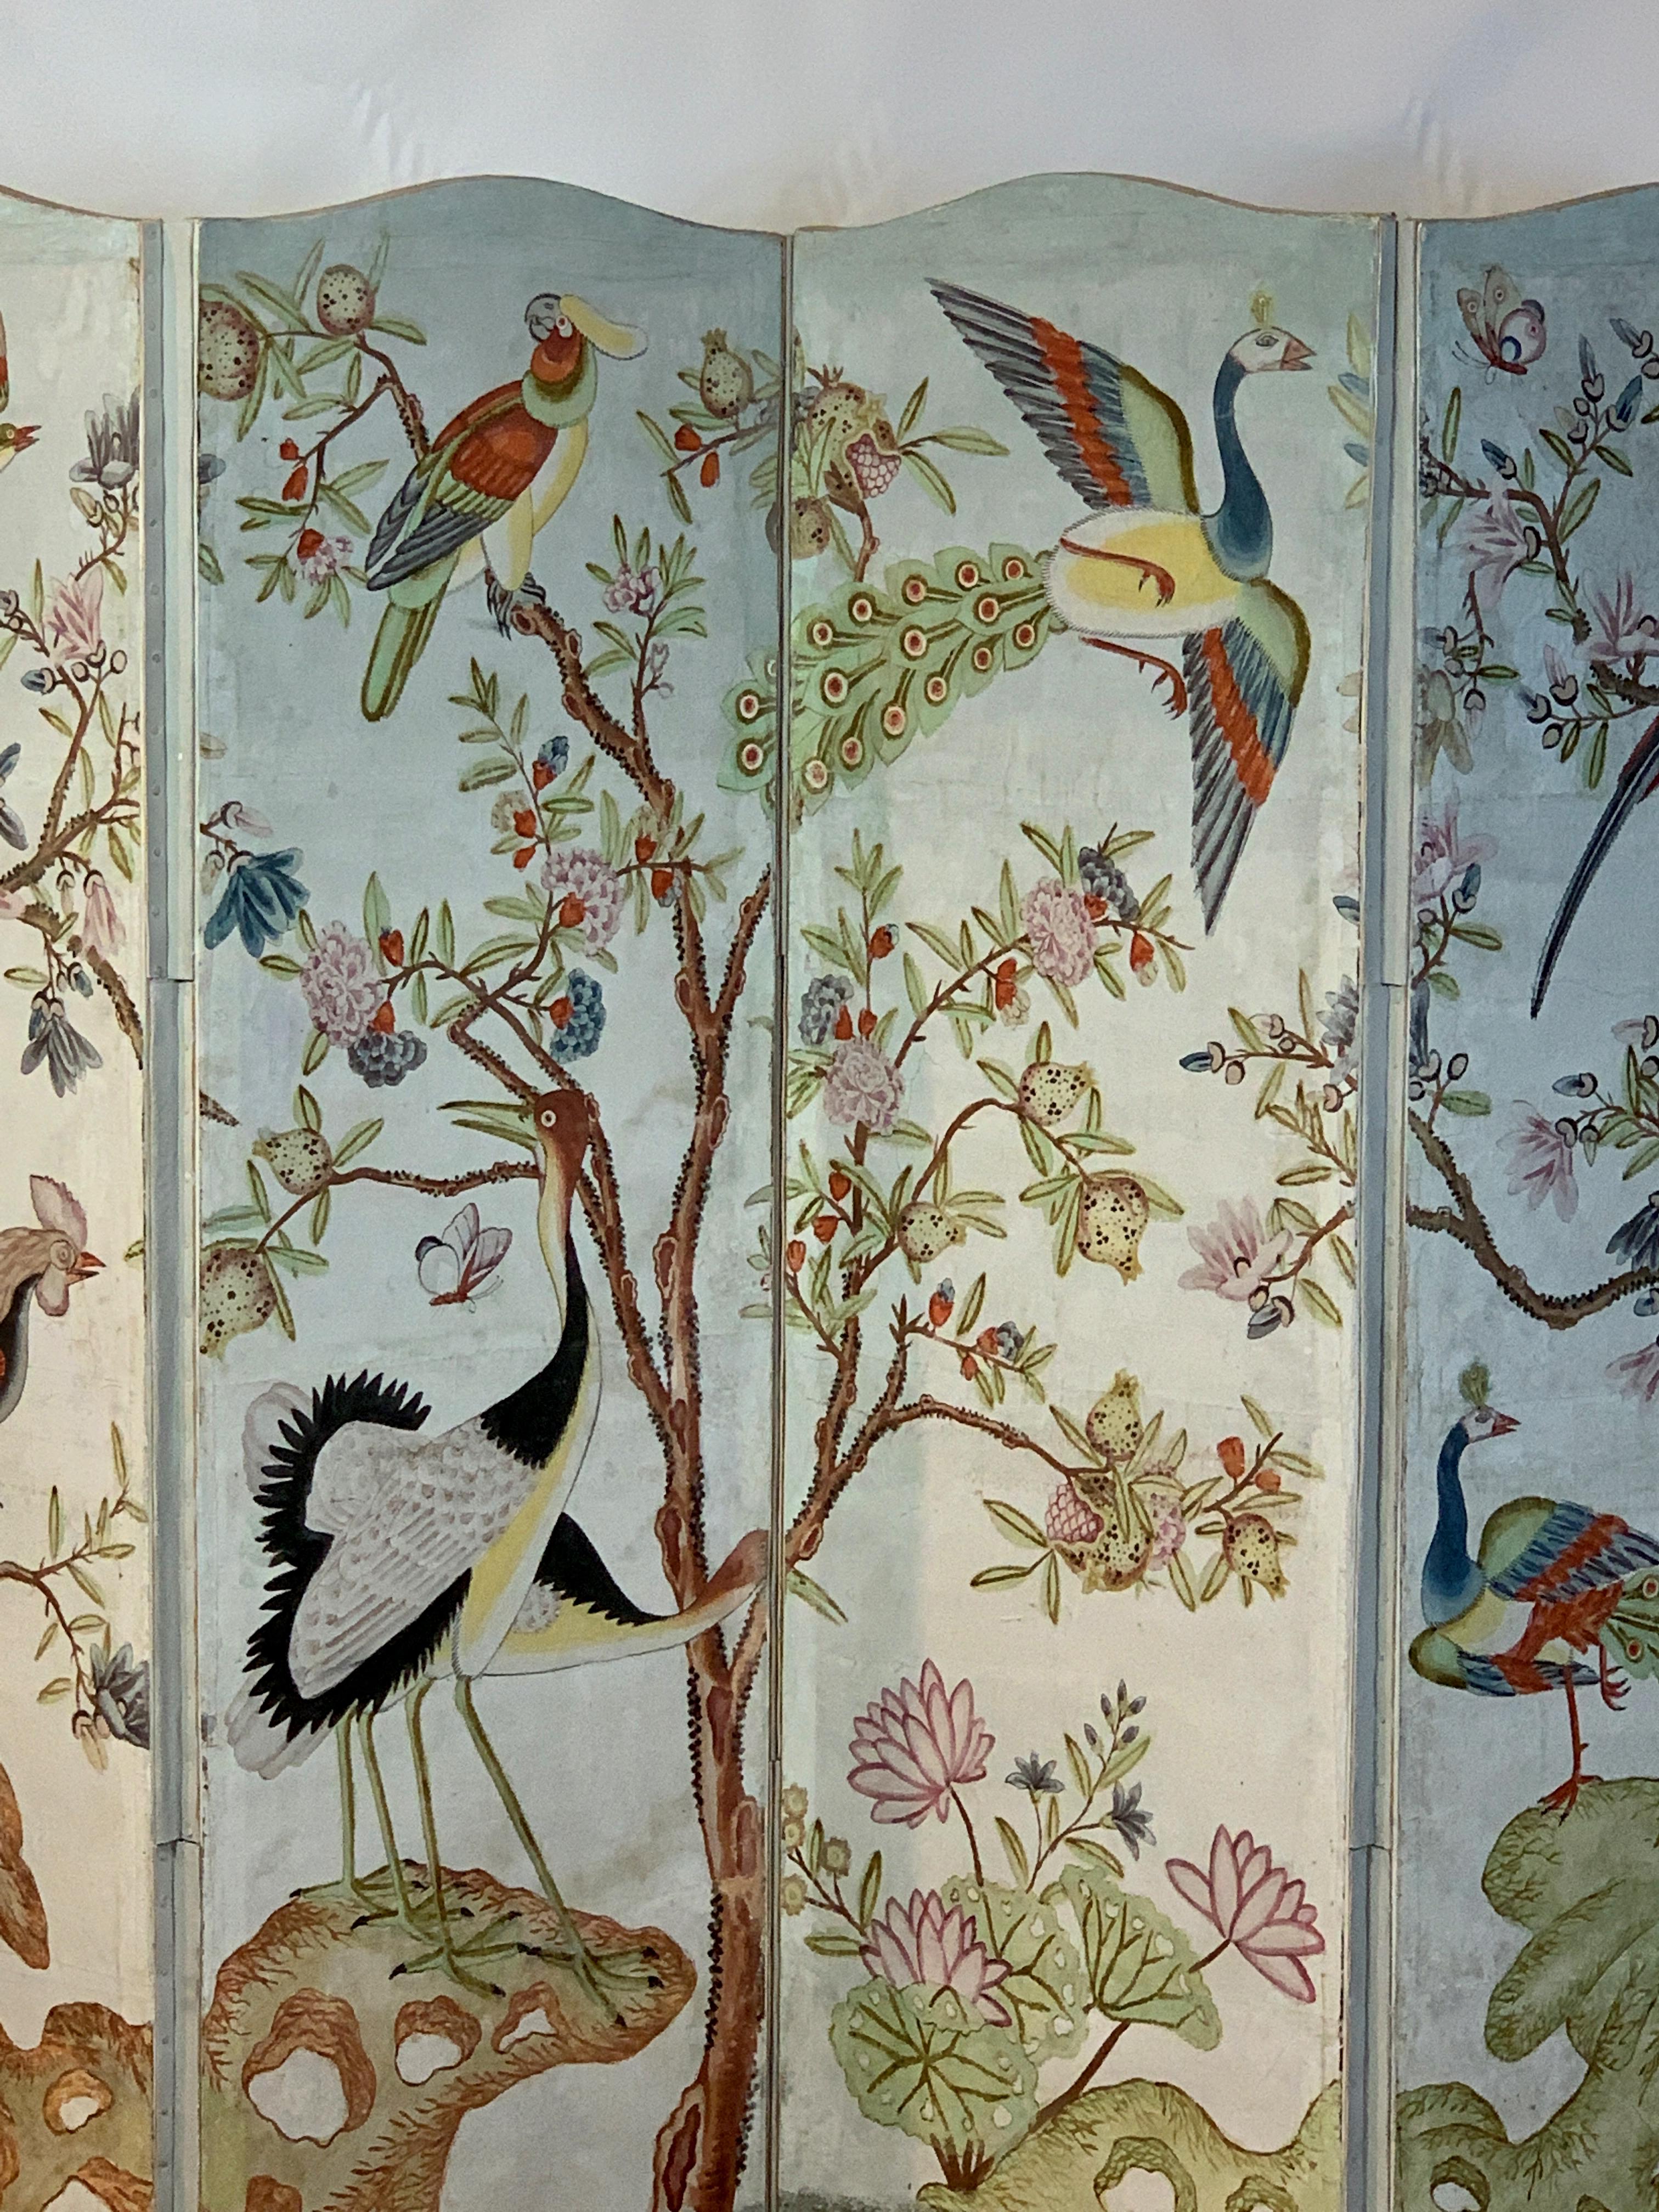 A beautifully painted early 20th century four panel folding screen in the style of Gracie or de Gournay wallpaper depicting exotic colorful birds set amid flowering trees.